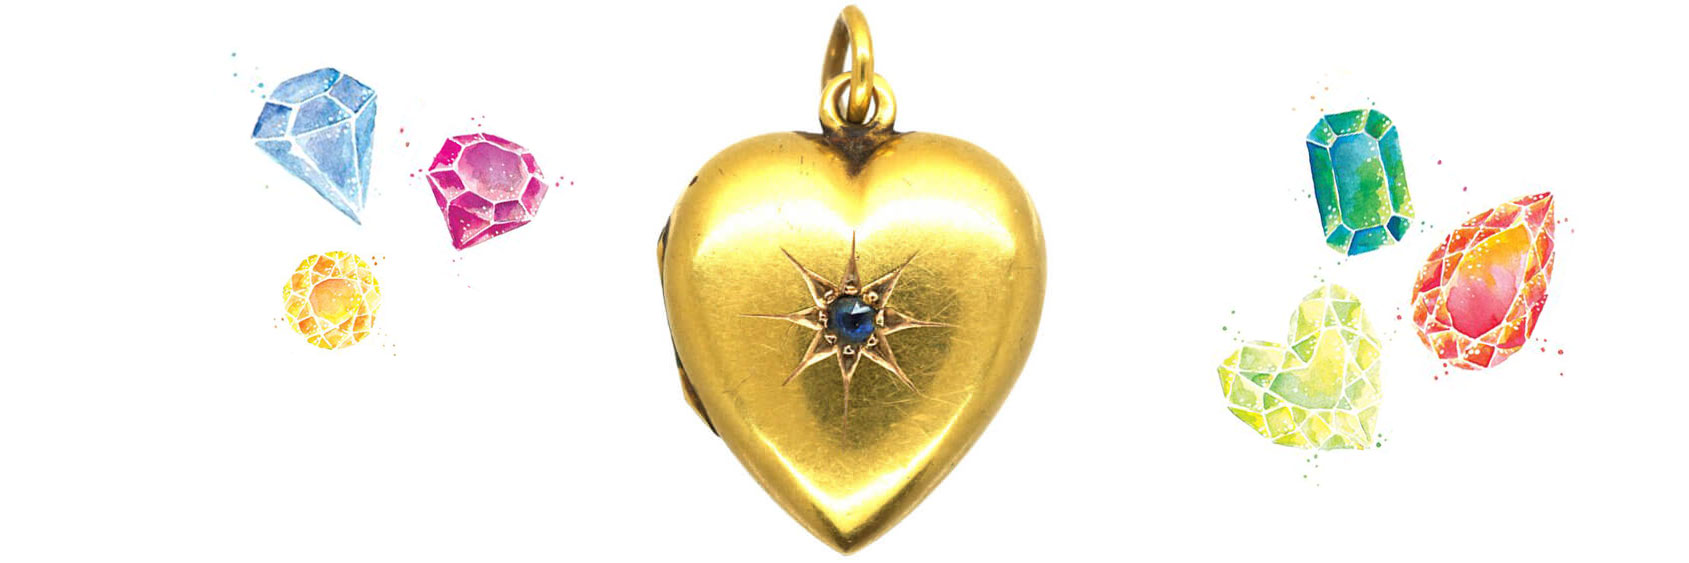 Edwardian 15ct Gold Heart Locket set with a Sapphire